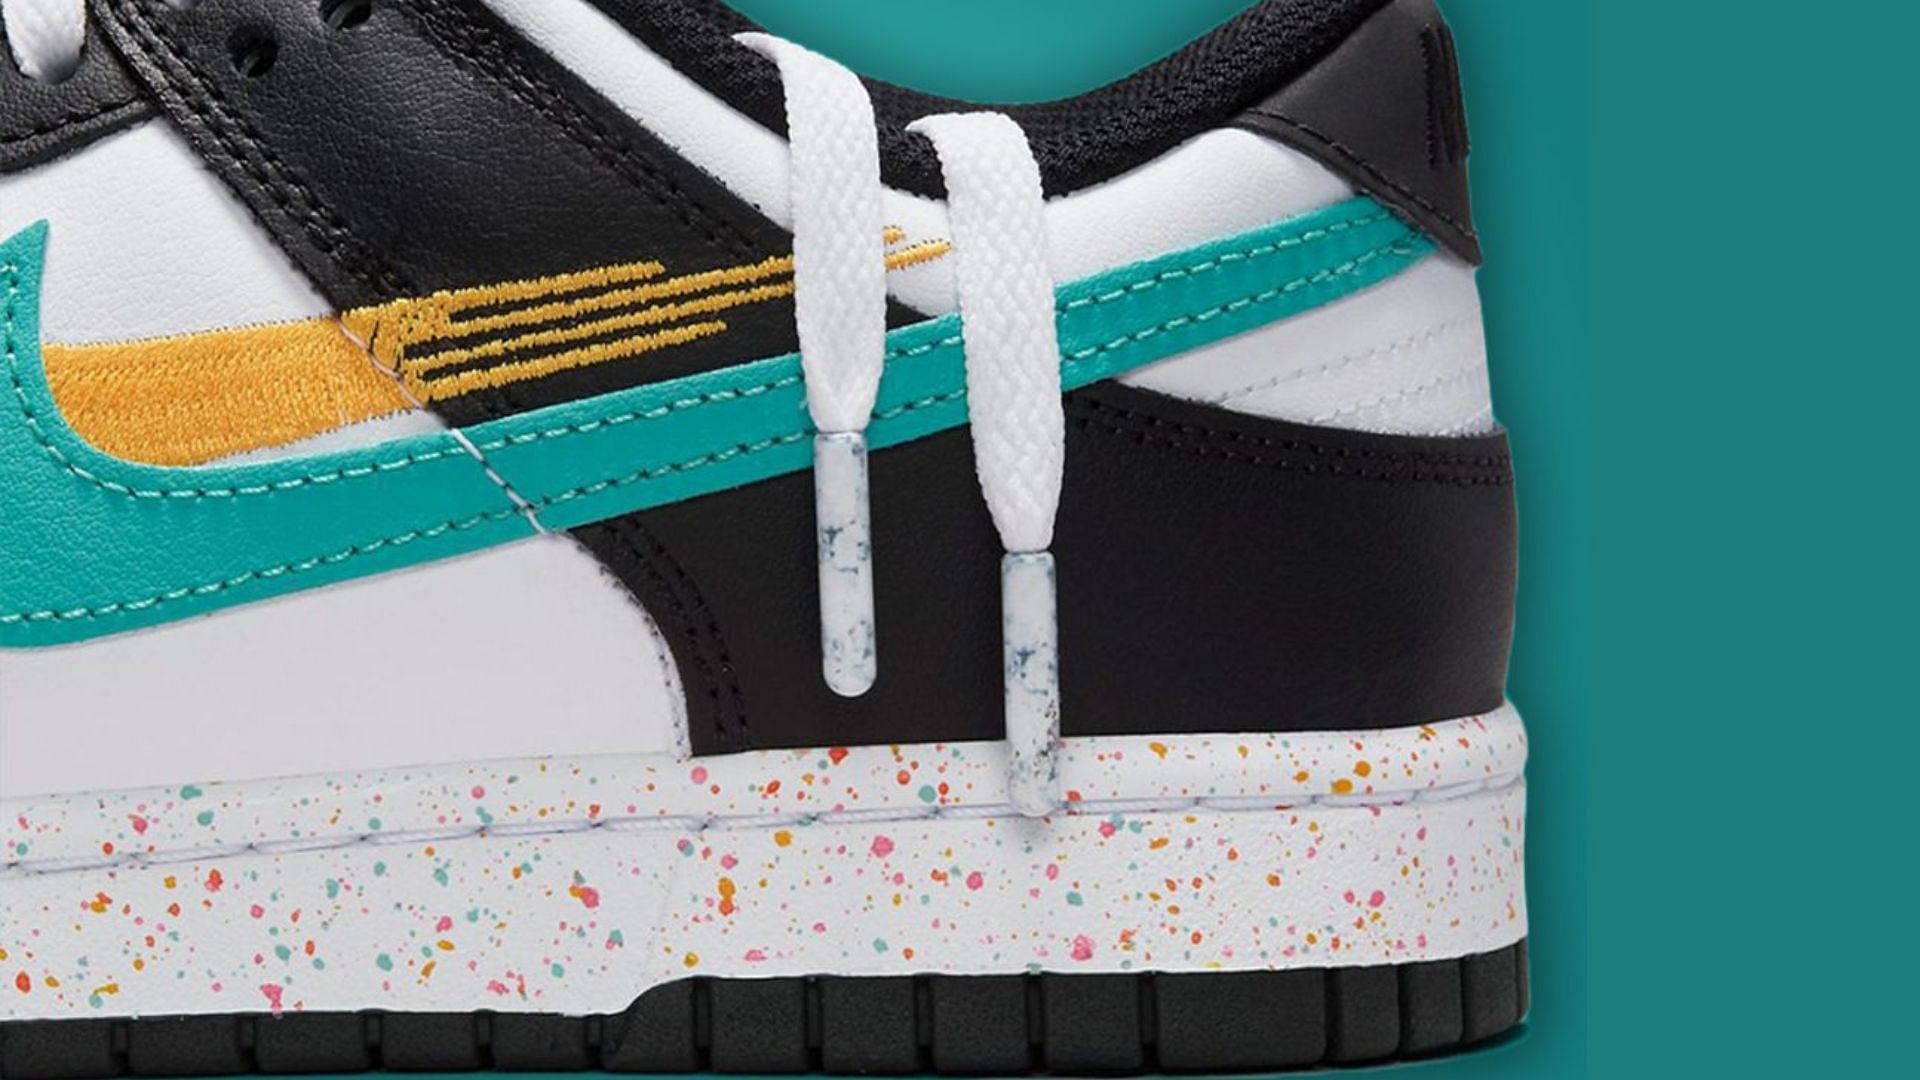 Take a closer look at the speckled midsoles and marbled lace aglets of these impending sneakers (Image via Nike)